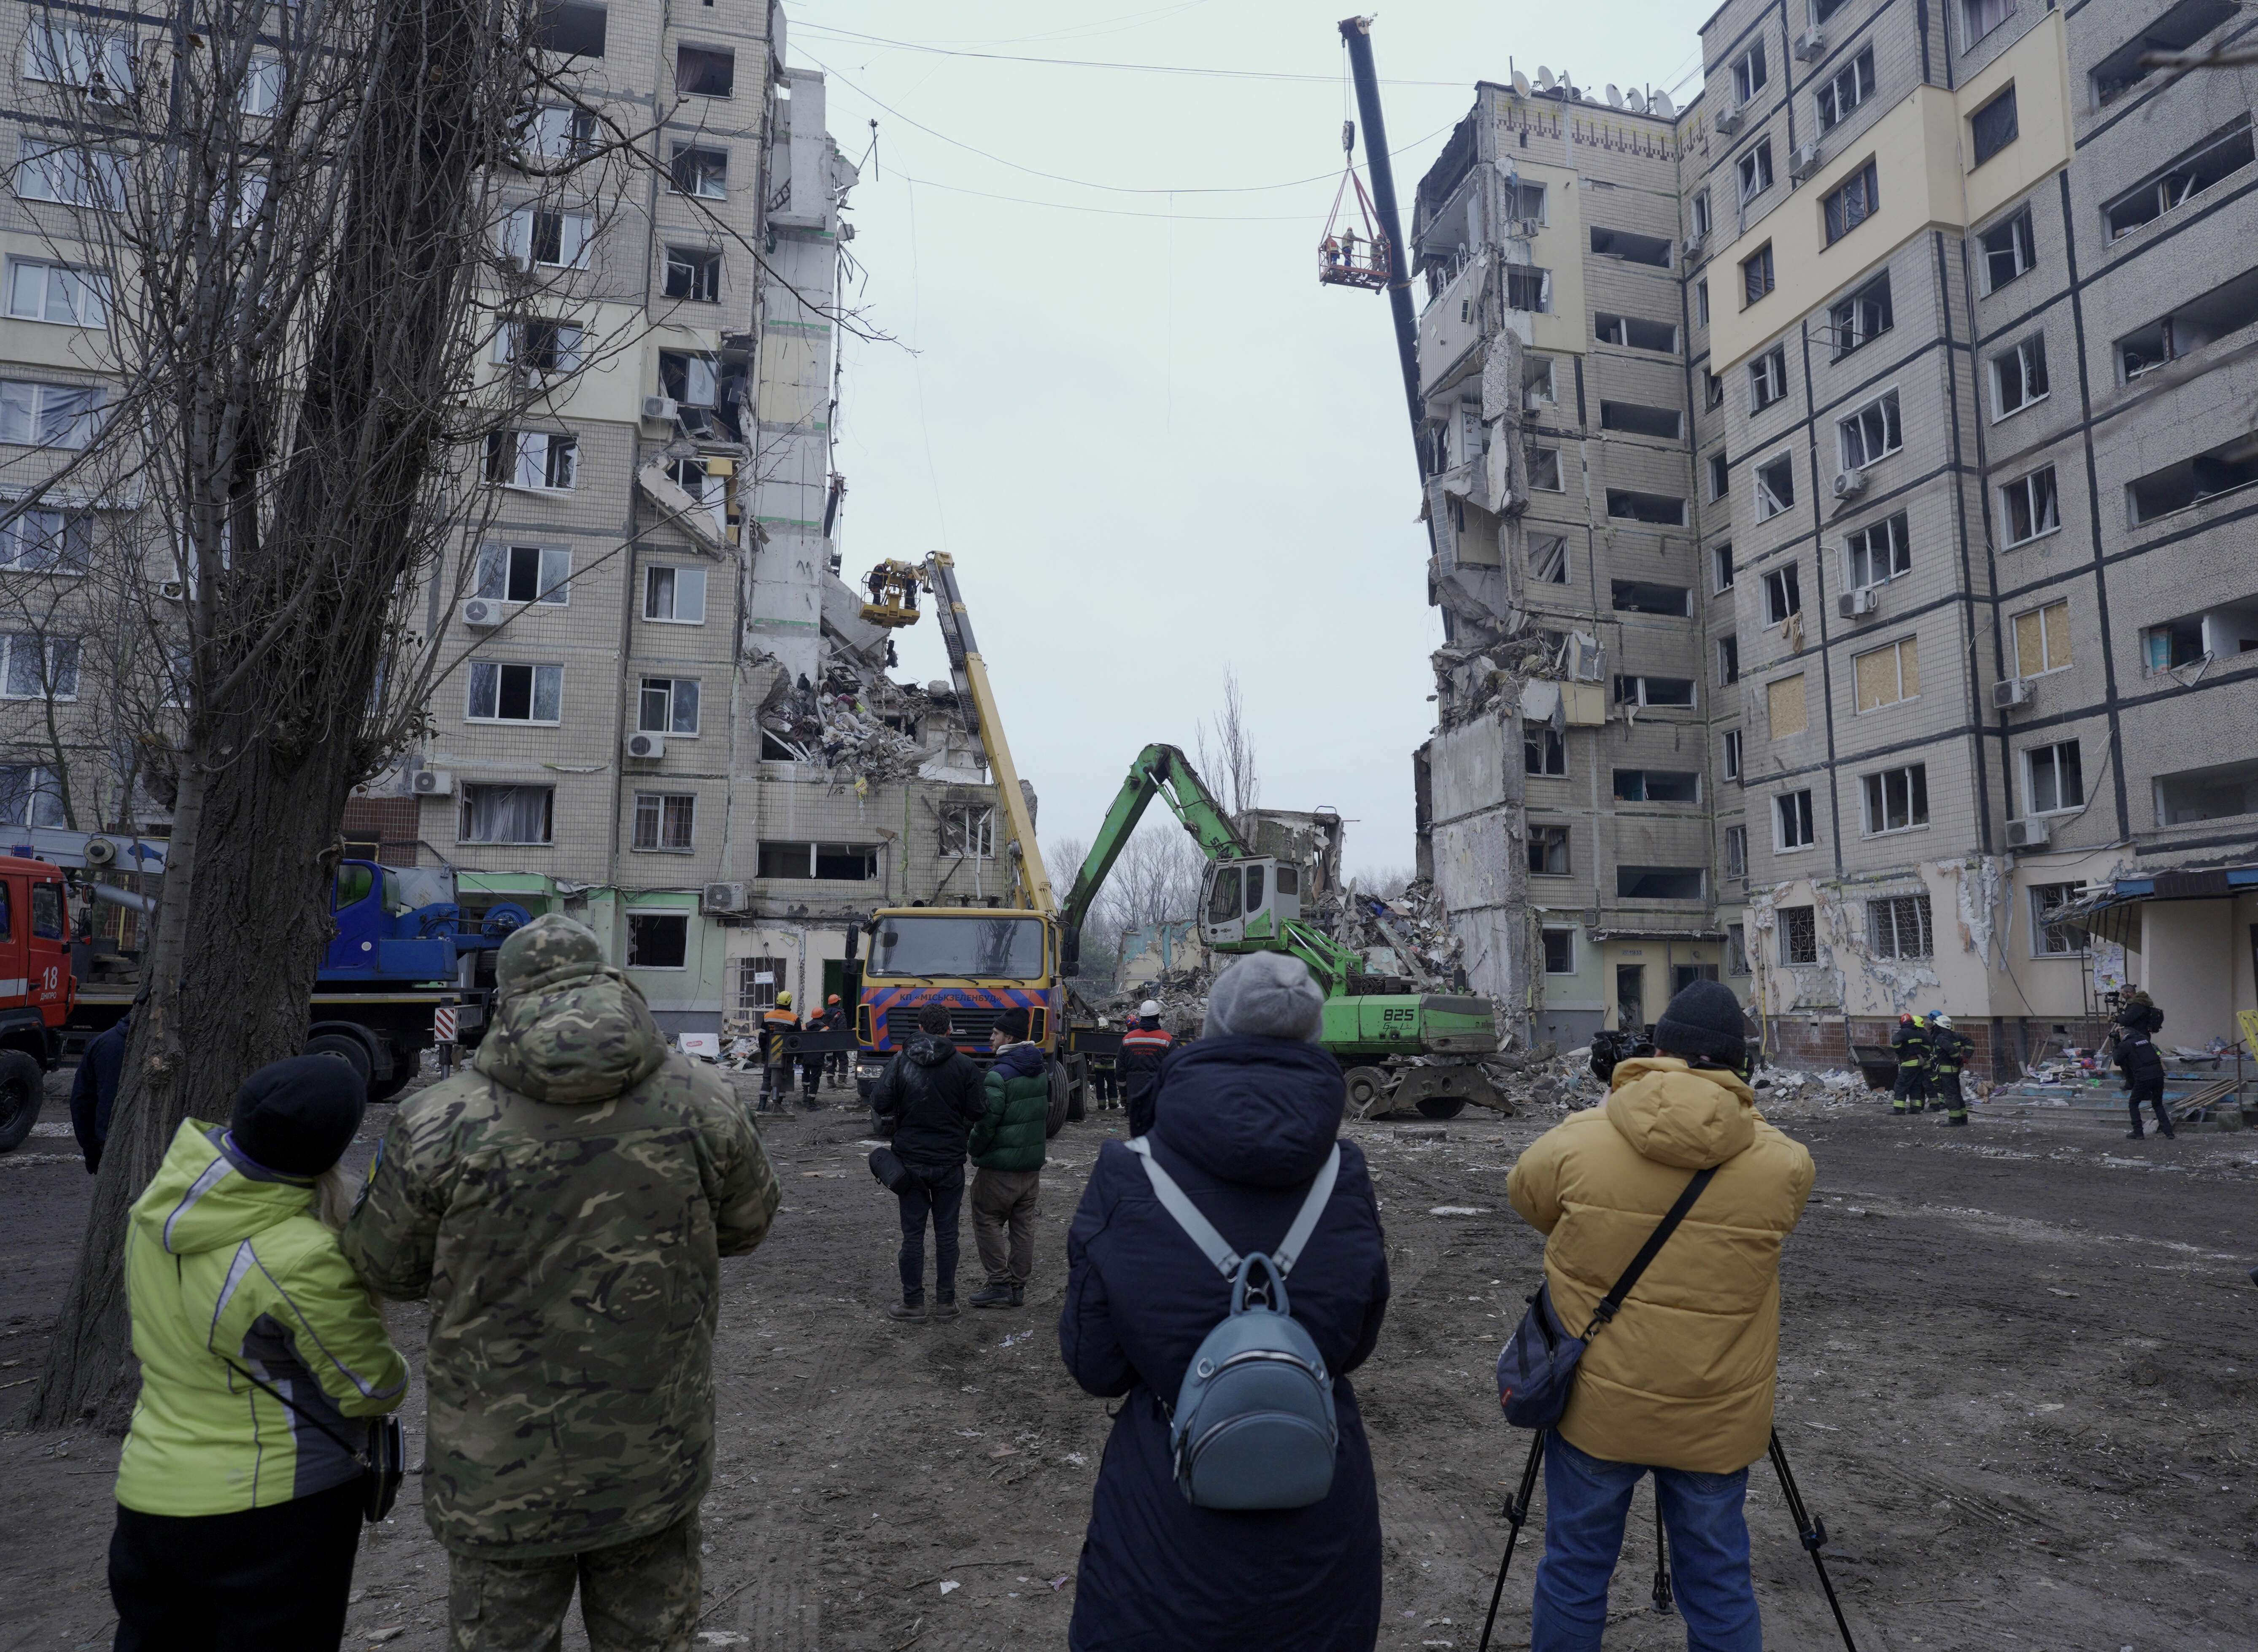 Local residents look at rescuers working on a residential building destroyed after a missile strike, in Dnipro on January 16, 2023, amid the Russian invasion of Ukraine. - According to State Emergency Service report, as of 1:00 pm on December 16, 40 people died, including 6 children; 75 people got injured, including 14 children; 39 people were rescued, including 6 children; the fate of 34 people is still unknown. (Photo by vitalii matokha / AFP)